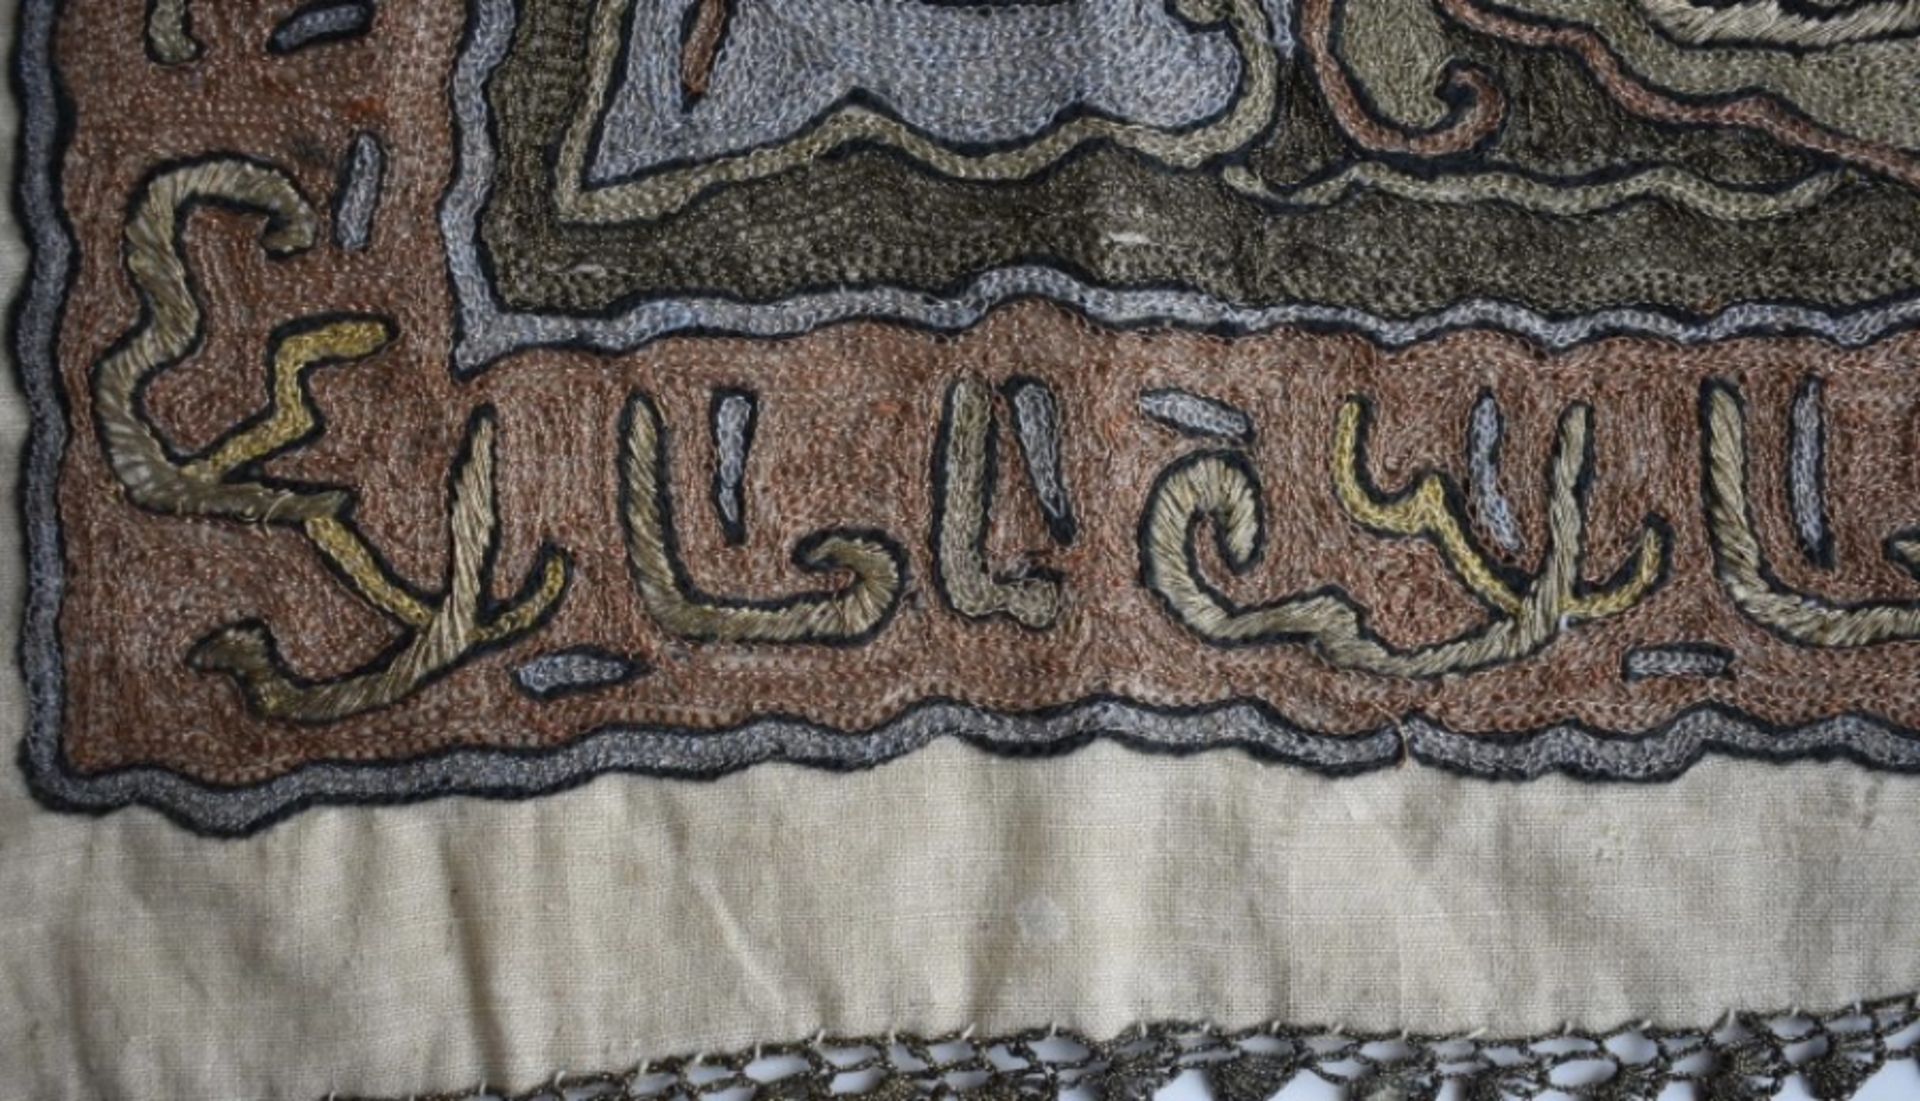 Ottoman Embroidery - Image 2 of 6